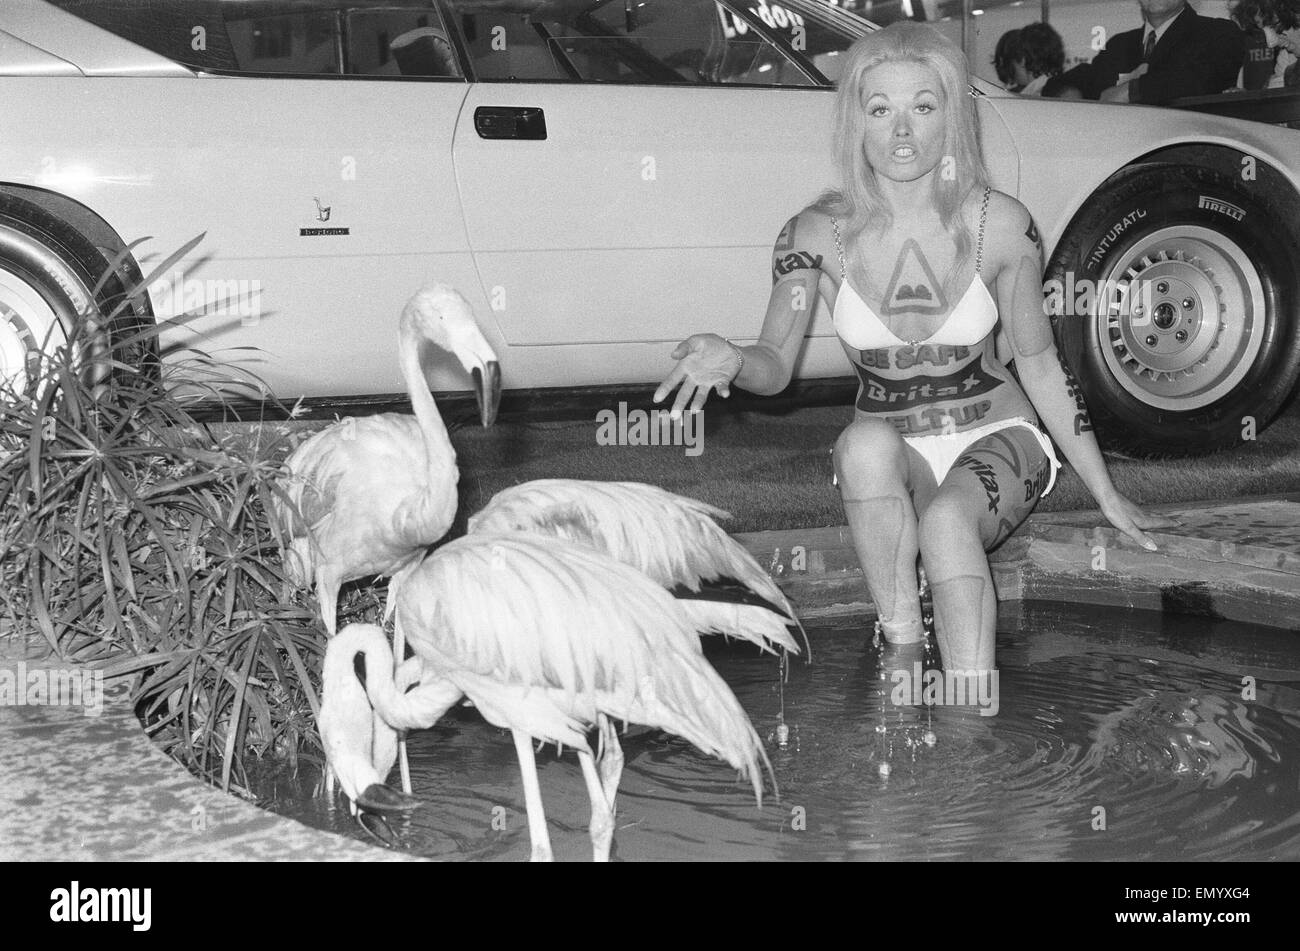 Model from the British Road Safety campaign poses in a bikini with flamingoes at the 1971 Earls Court motor show 19th October 1971 Stock Photo